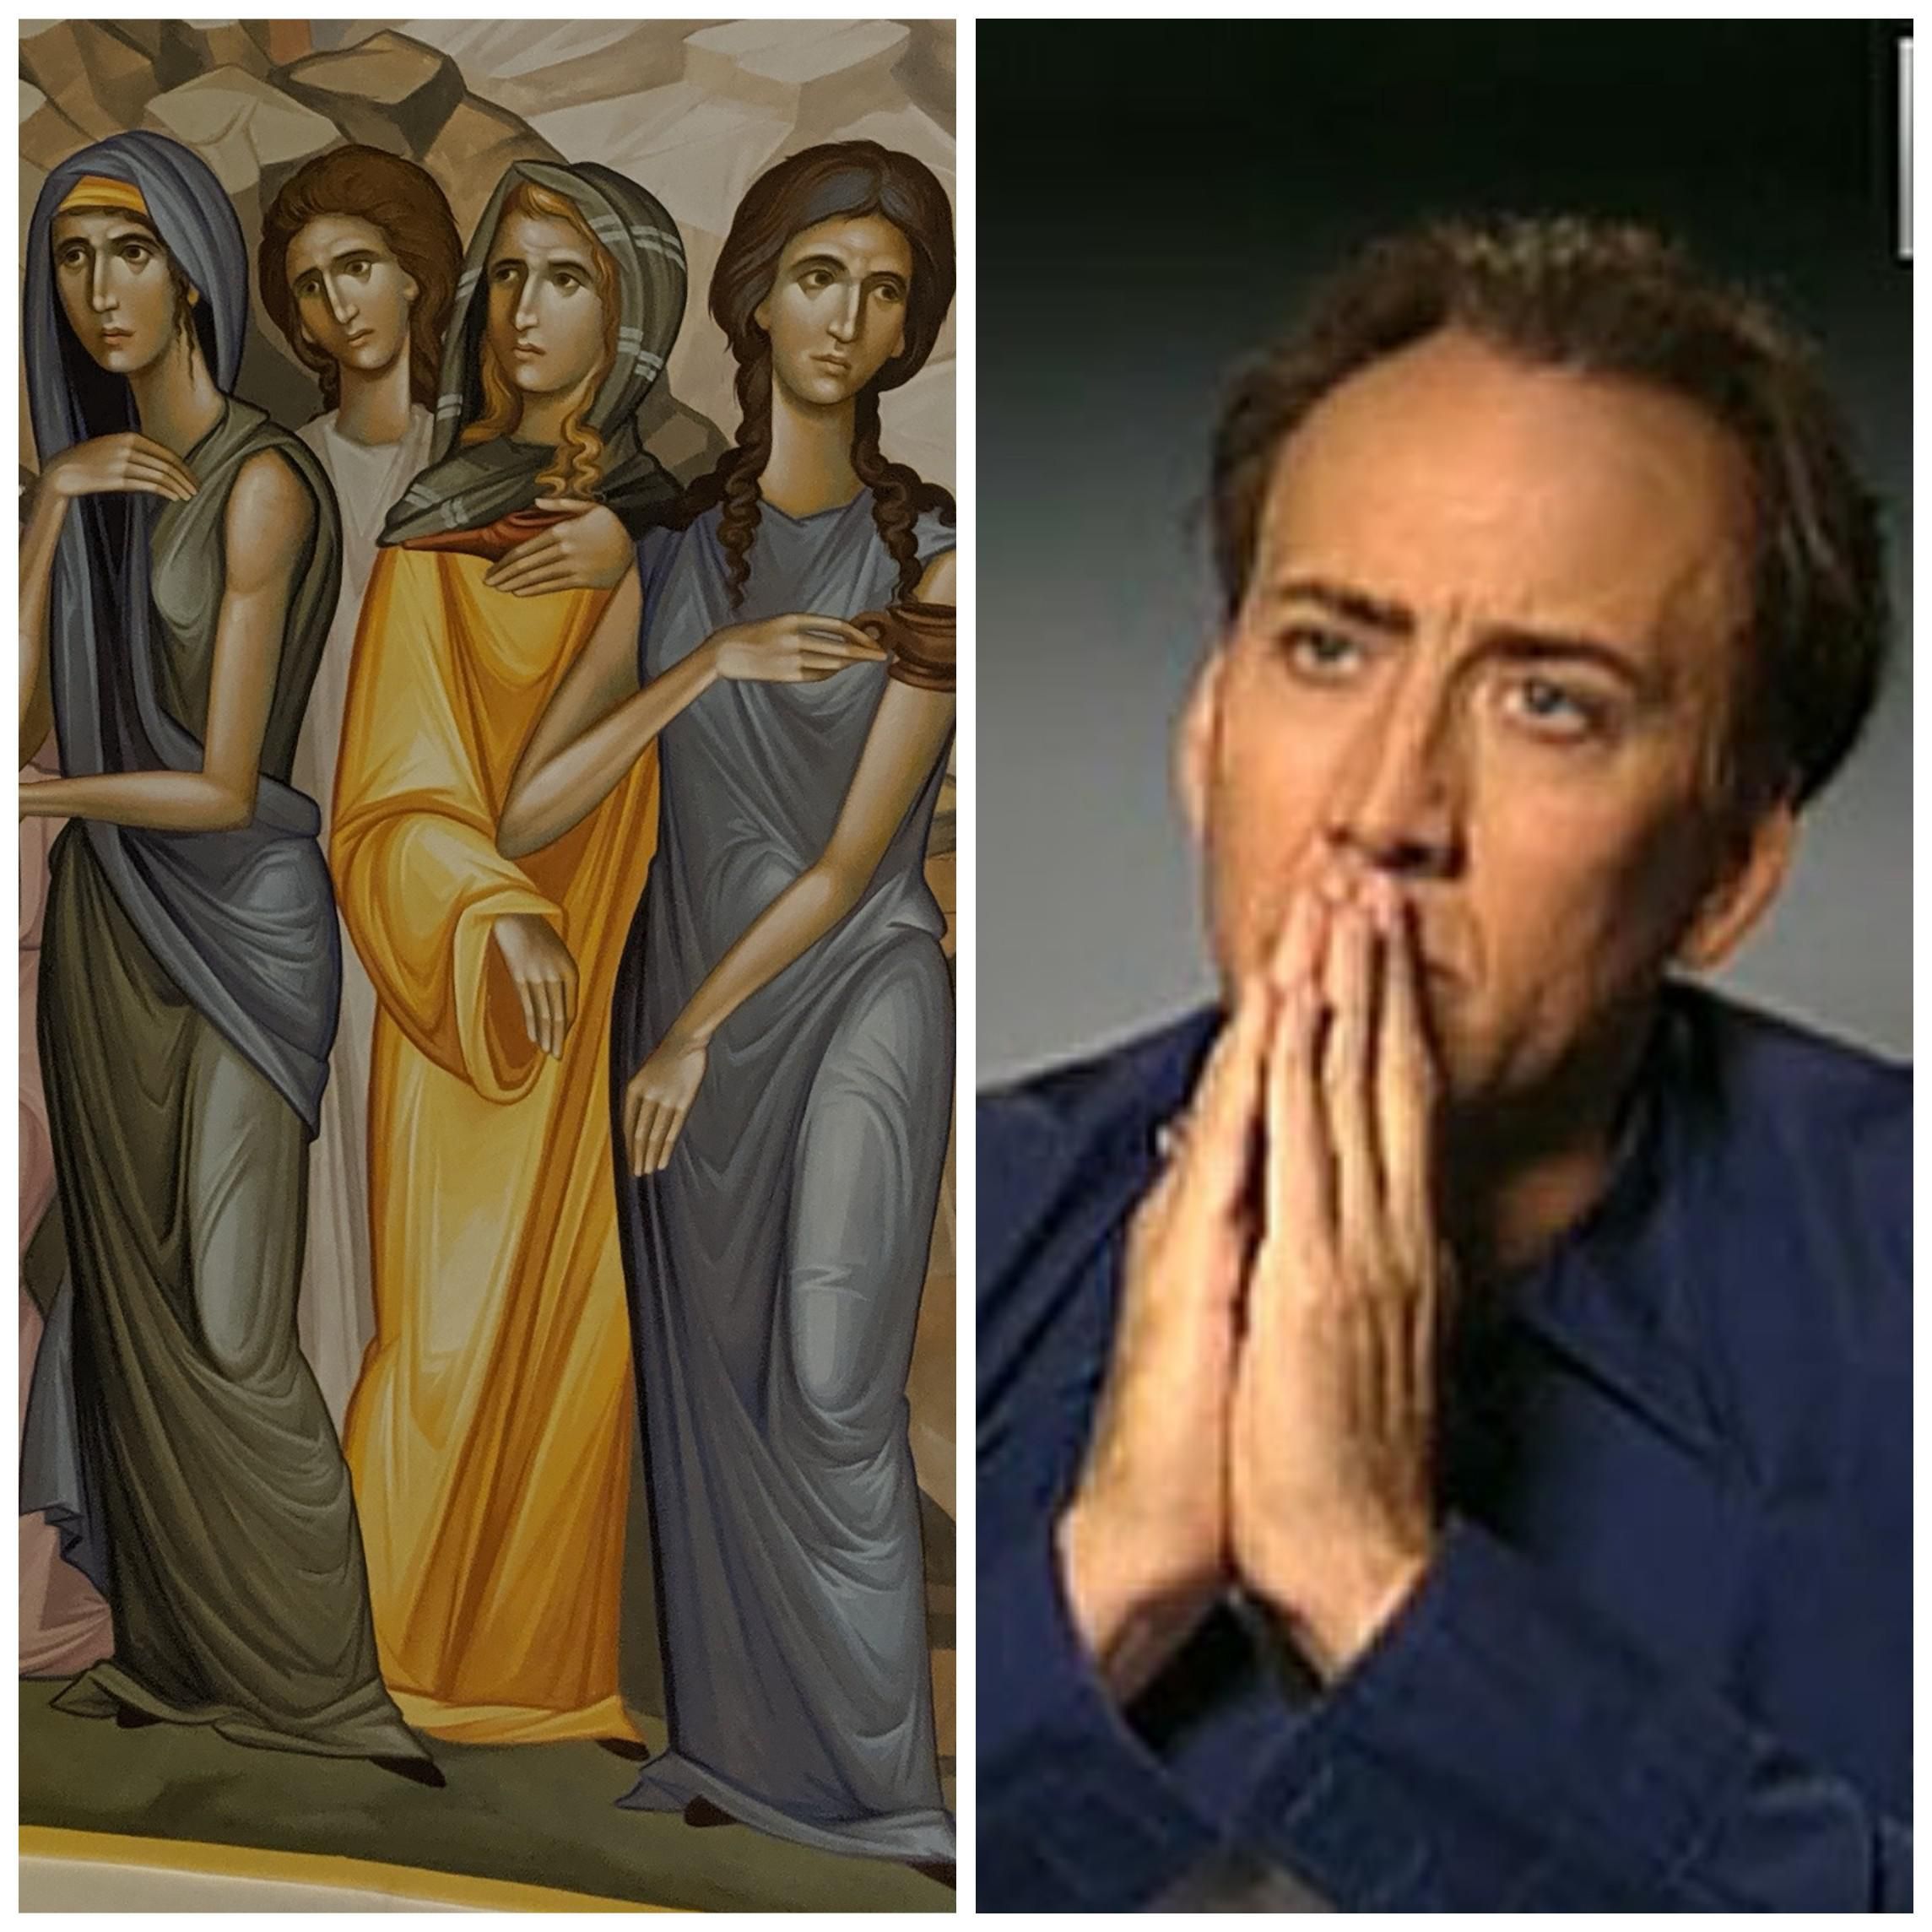 I went to a temple and all the paintings looked like Nicolas Cage.